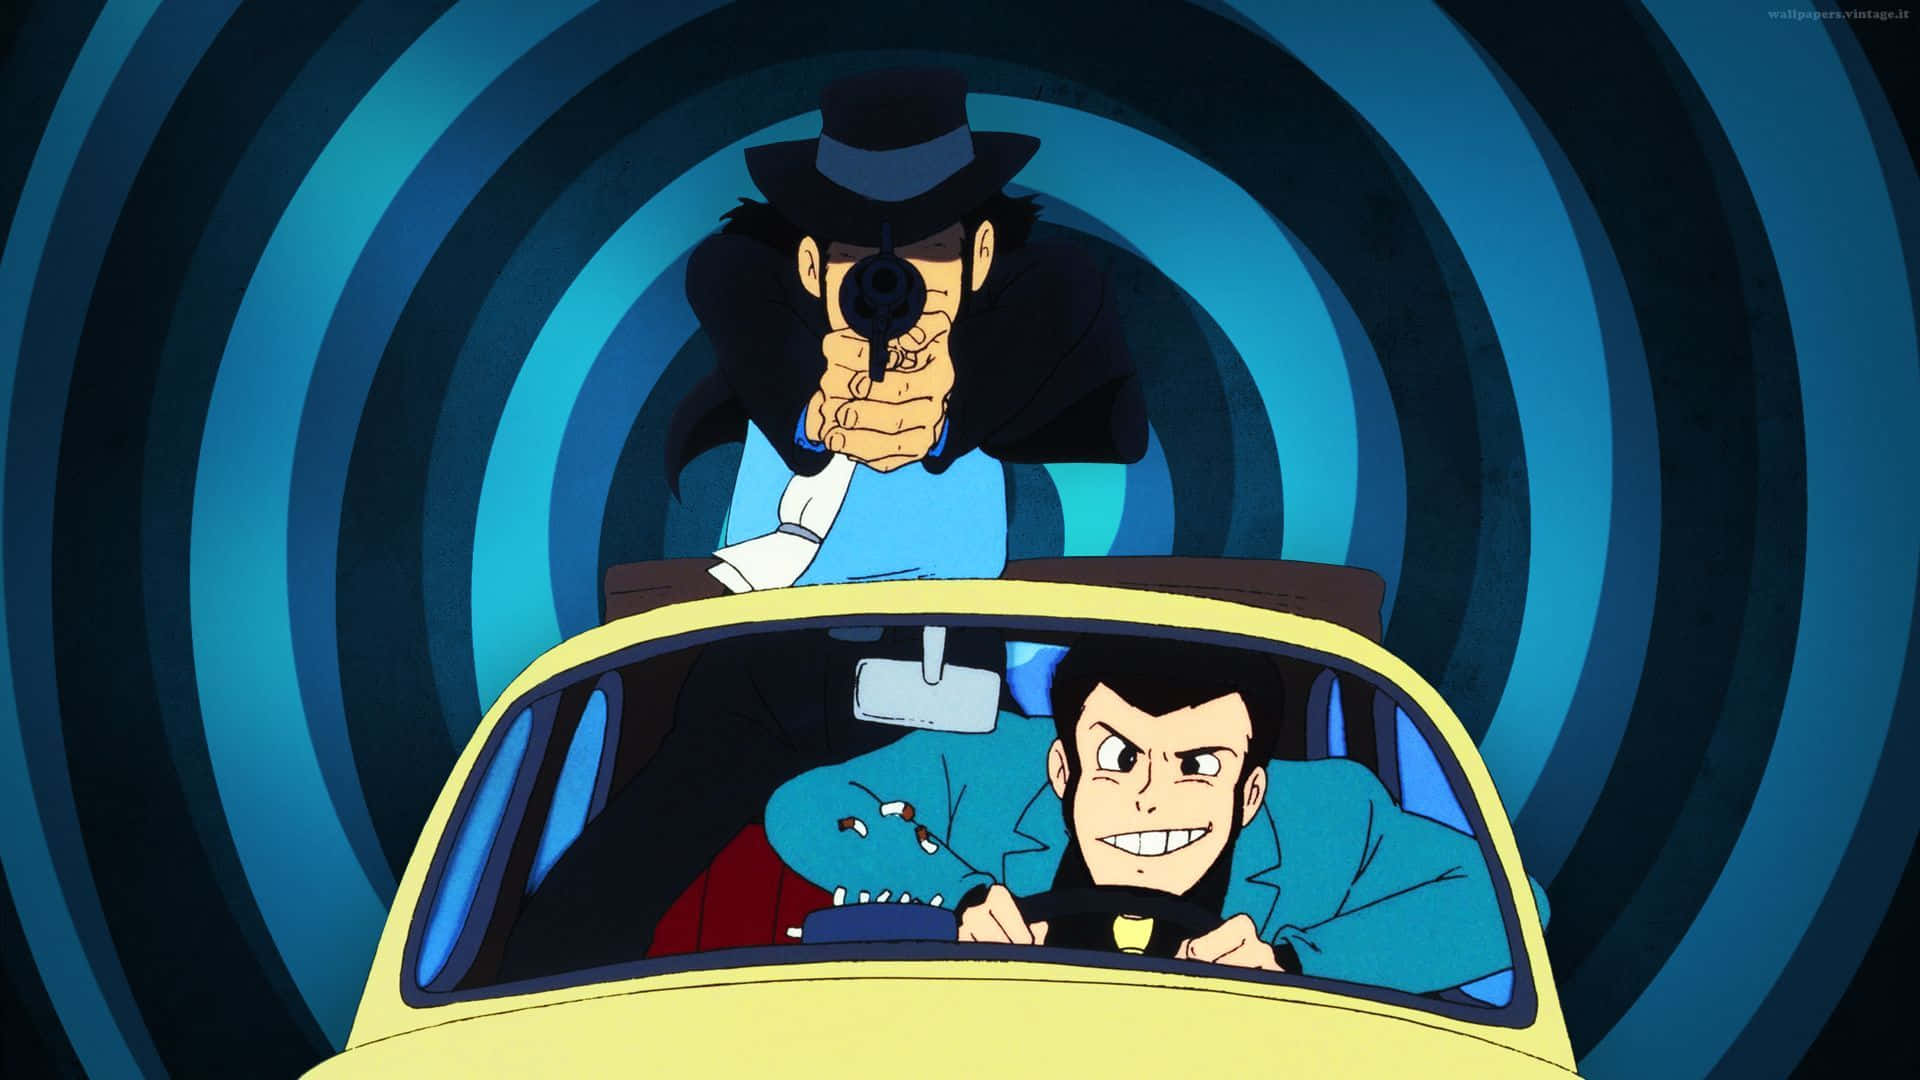 Lupin III and the gang in action Wallpaper